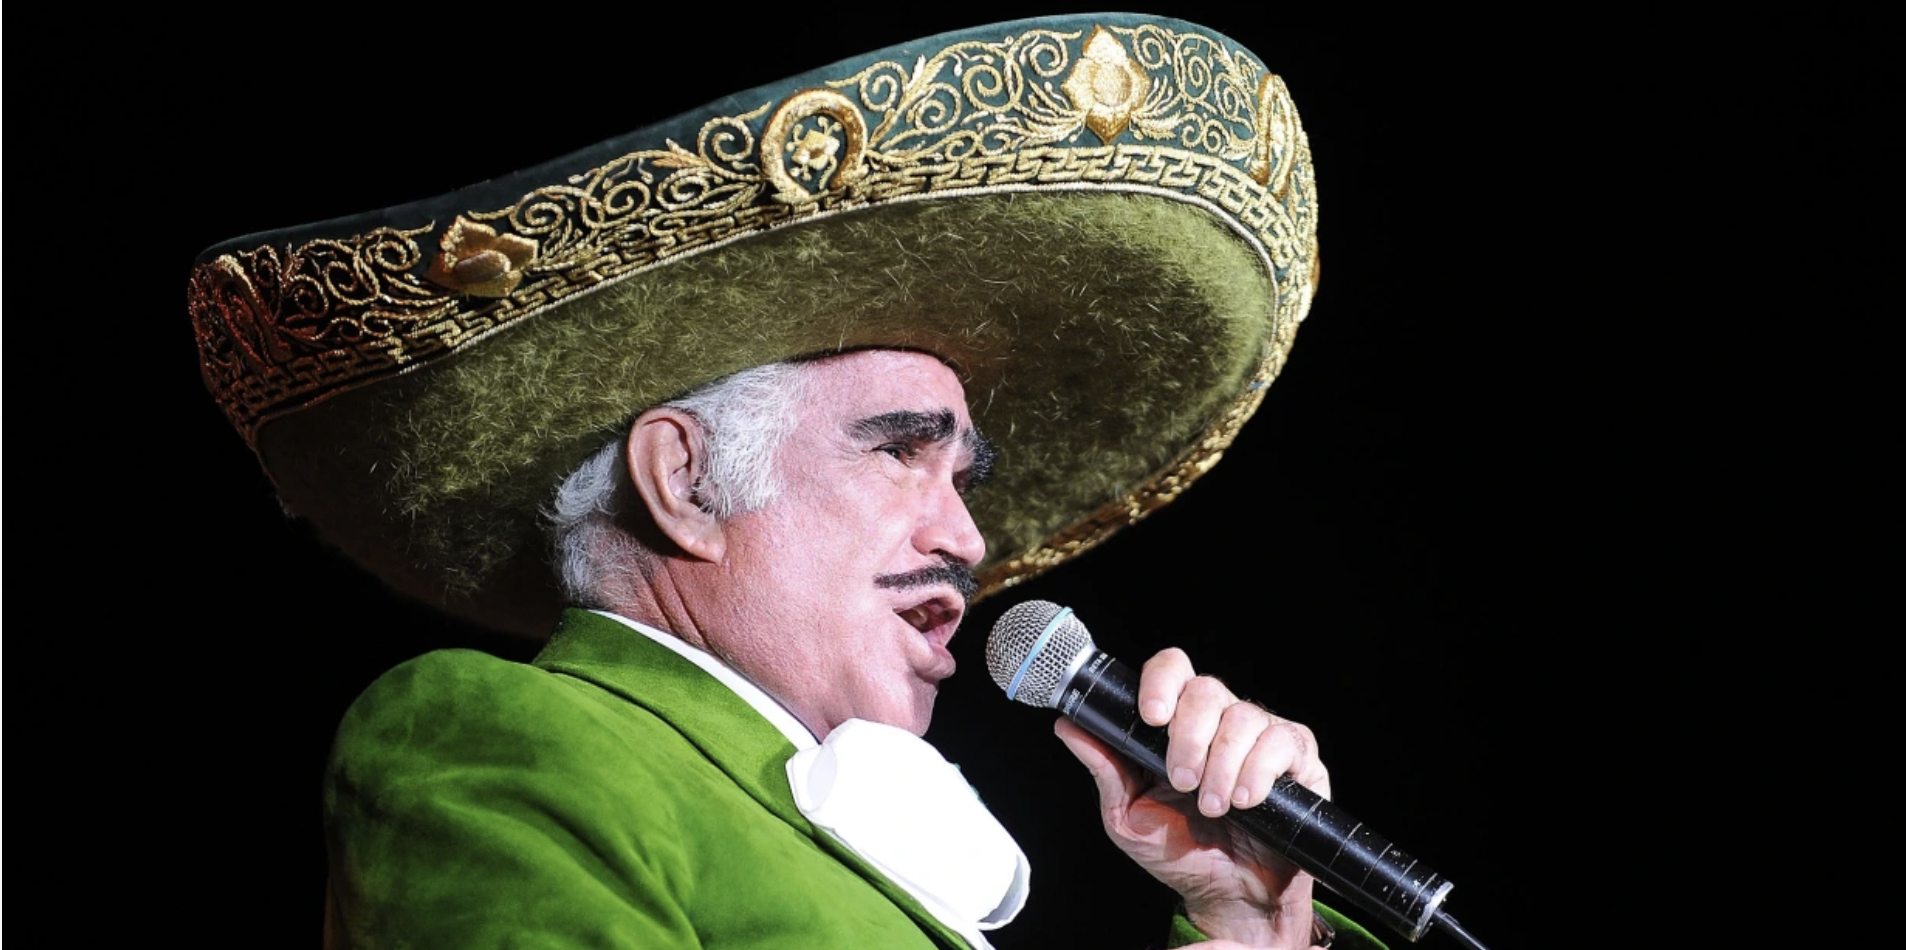 Vicenta Fernandez, the King of Mexico’s traditional ranchera music has died aged 81.